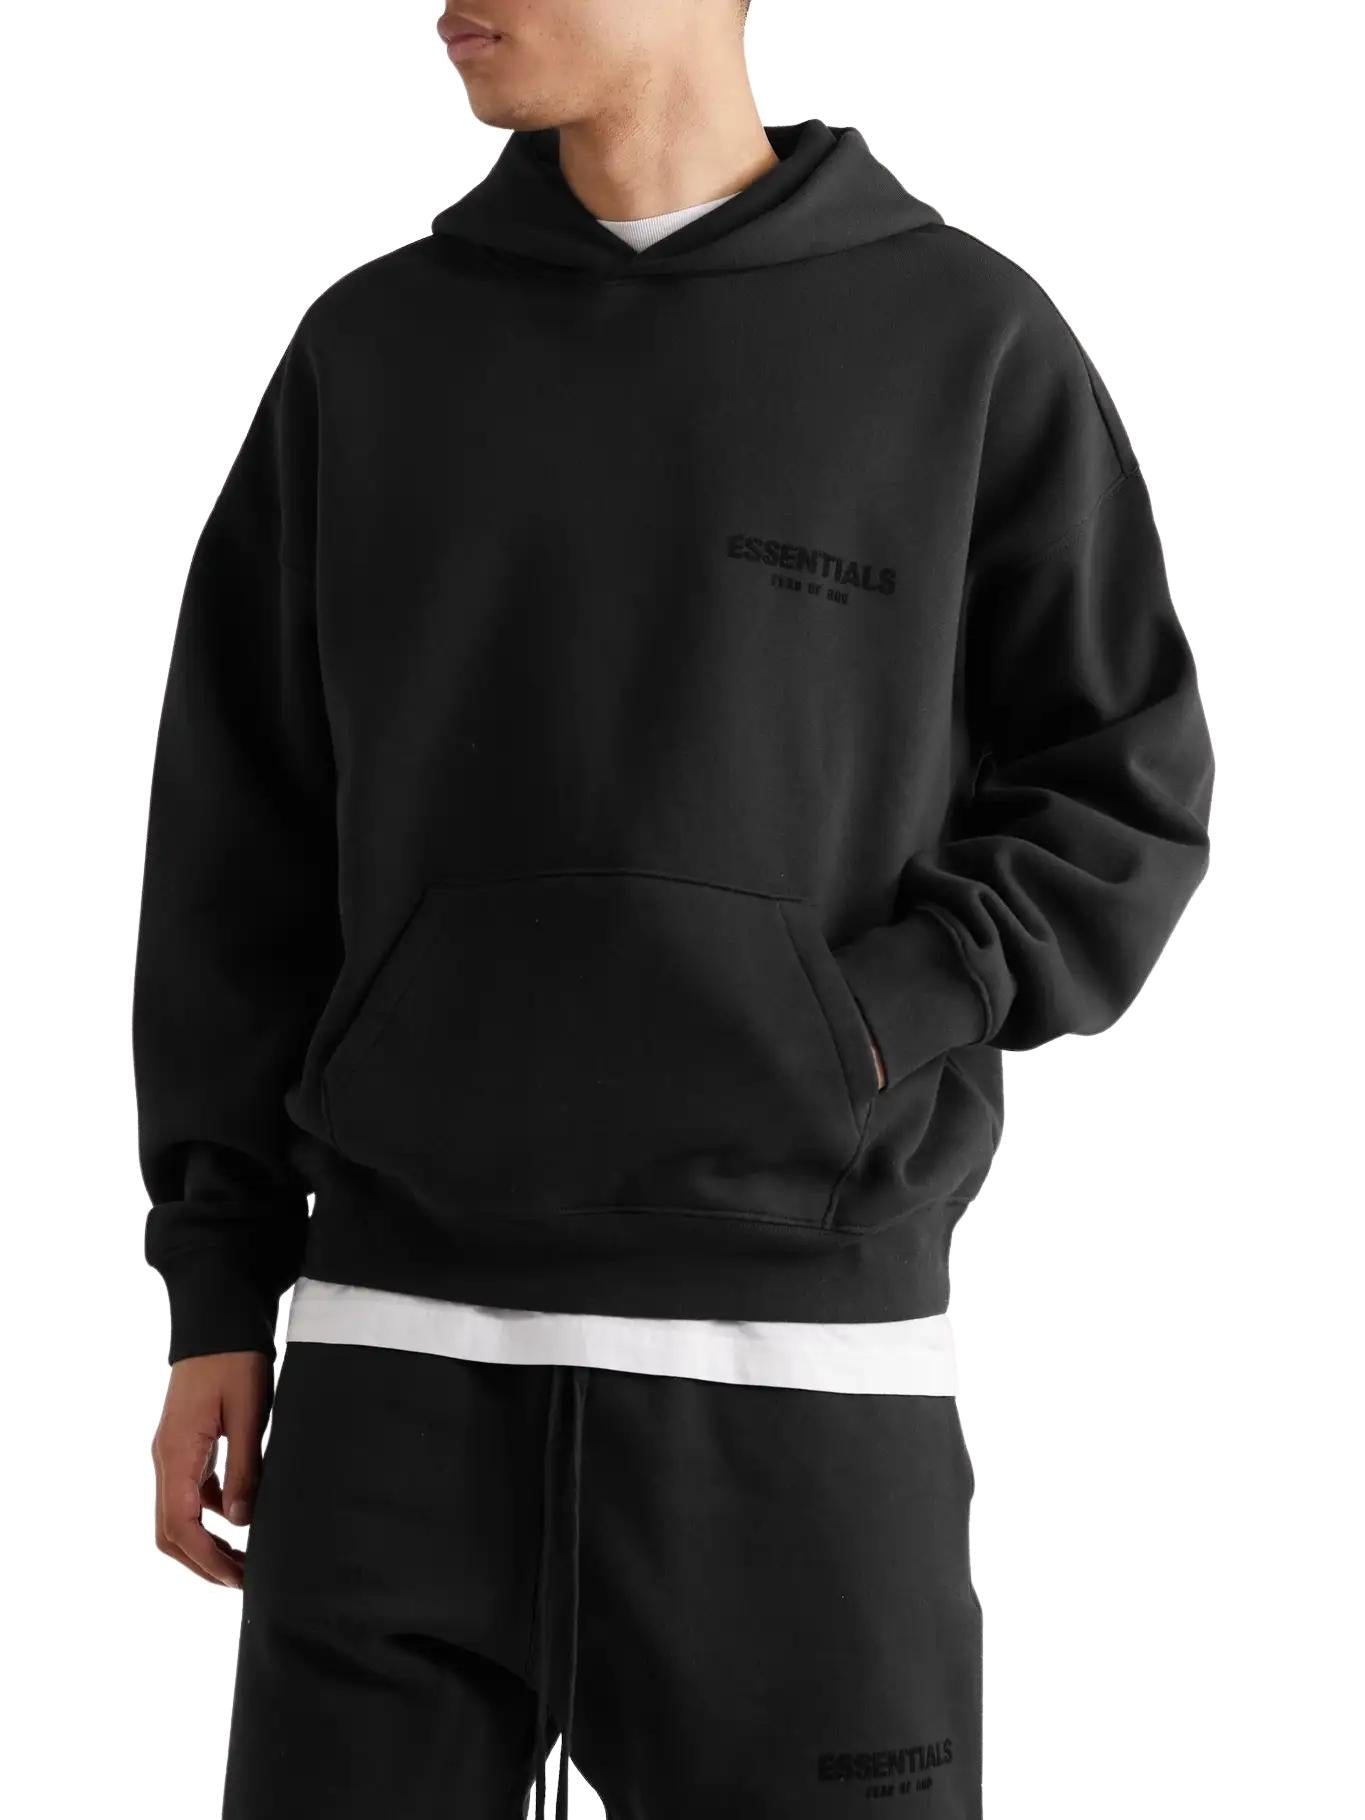 Fear of God ESSENTIALS Black / Stretch Limo Hoodie (SS22) Hype